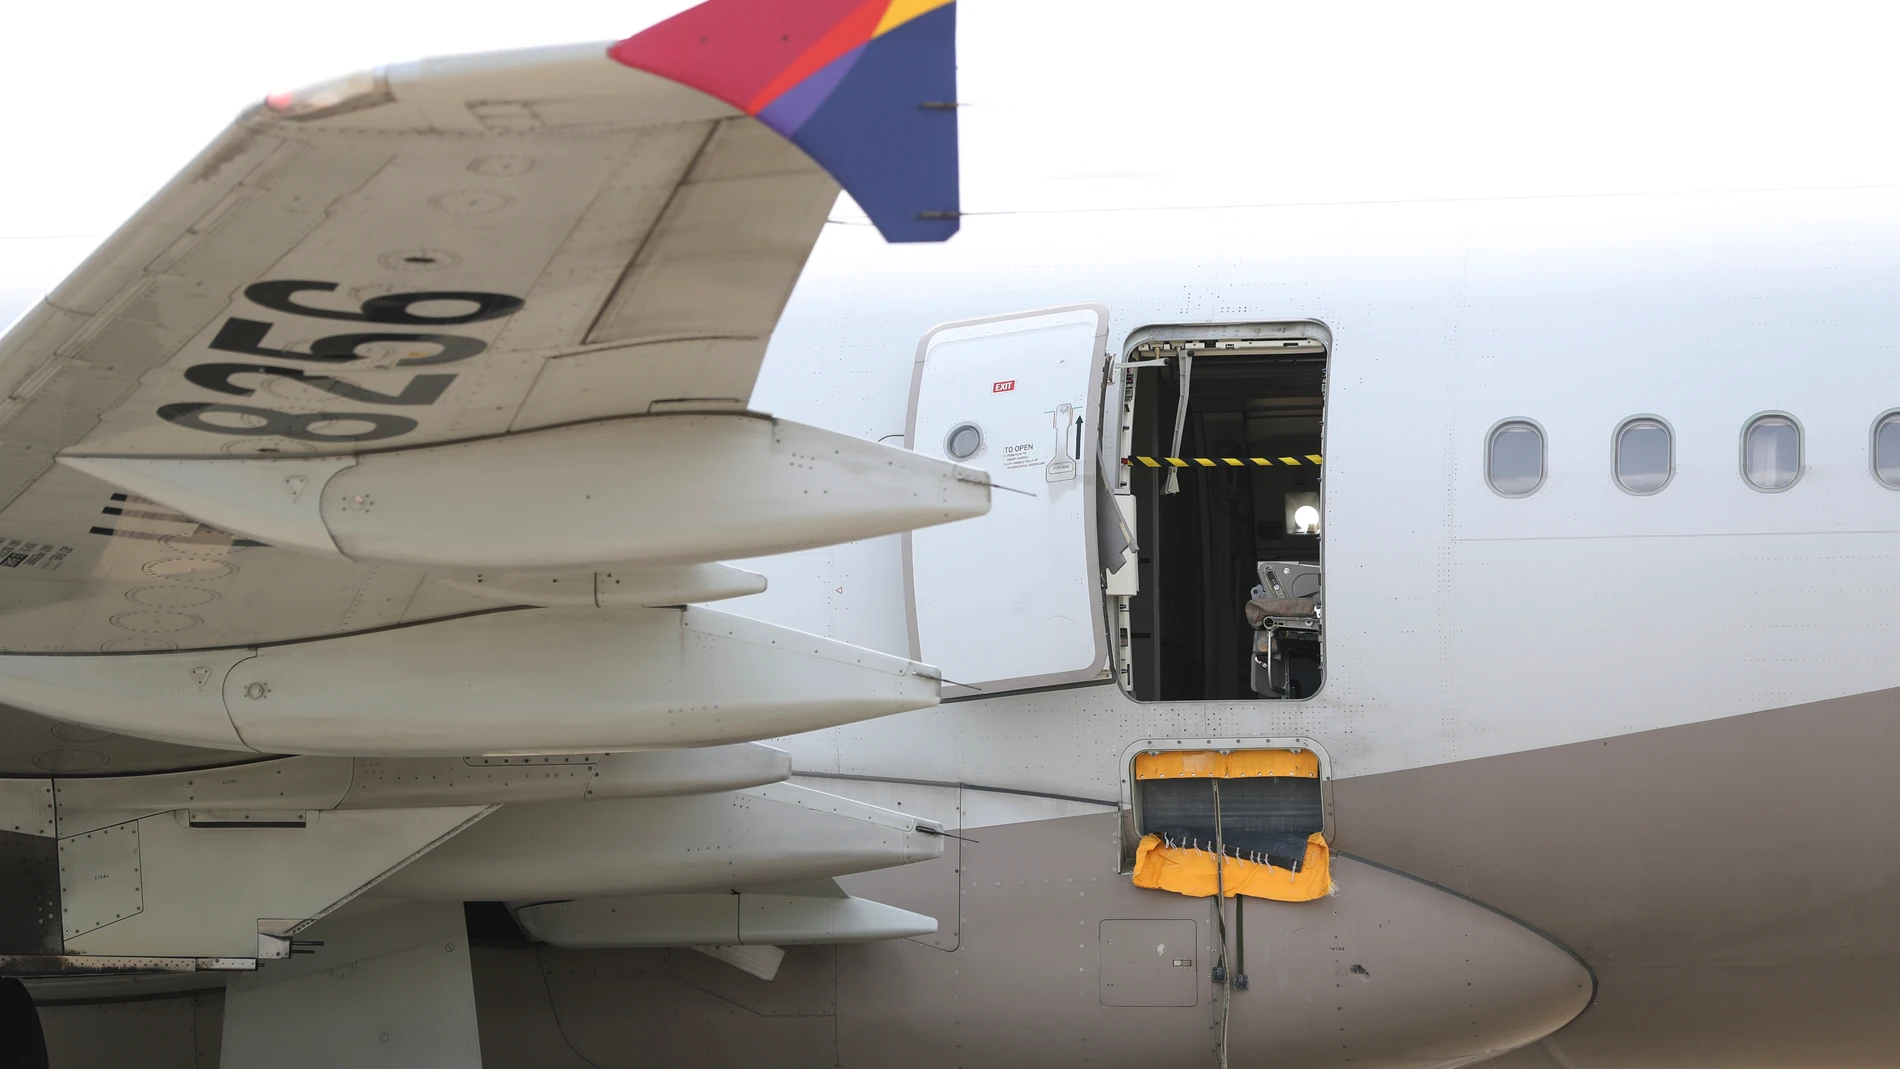 An Asiana Airlines plane is parked as one of the plane's doors suddenly opened at Daegu International Airport in Daegu, South Korea, Friday, May 26, 2023. A passenger opened a door on an Asiana Airlines flight that later landed safely at a South Korean airport Friday, airline and government officials said. (Yun Kwan-shick/Yonhap via AP)